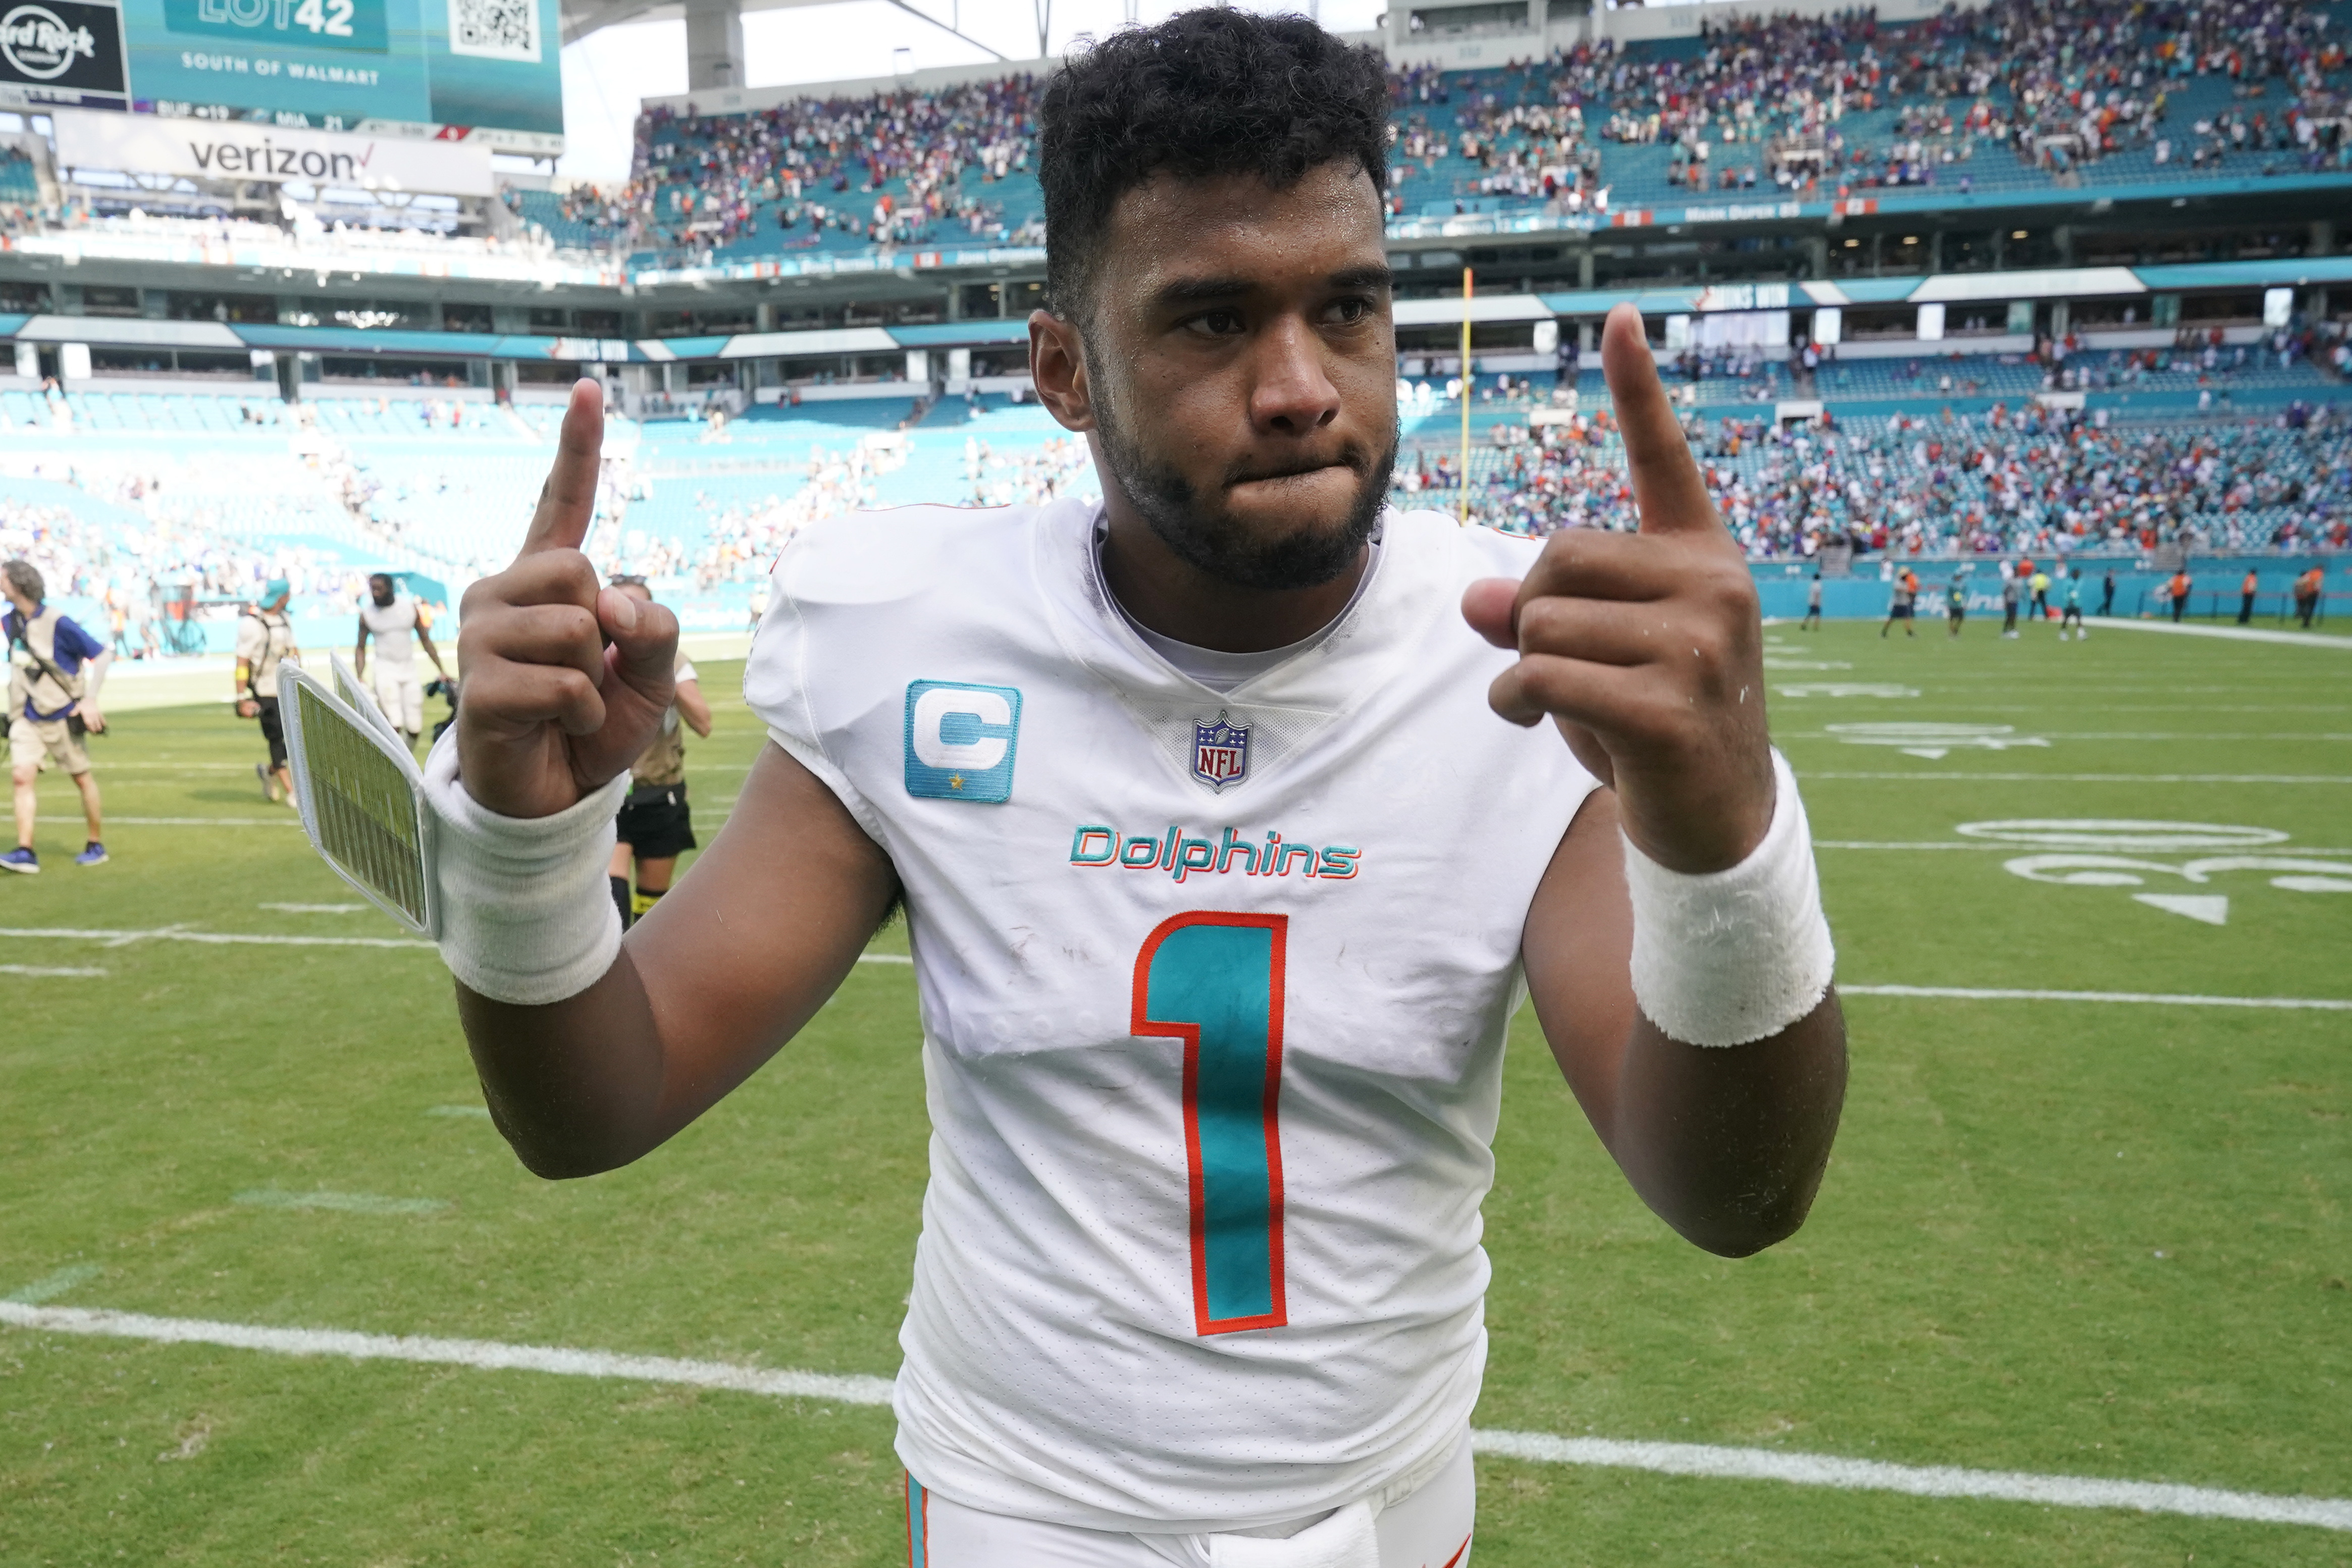 MONDAY HUDDLE: How 'Super' is outlook for Dolphins after win over